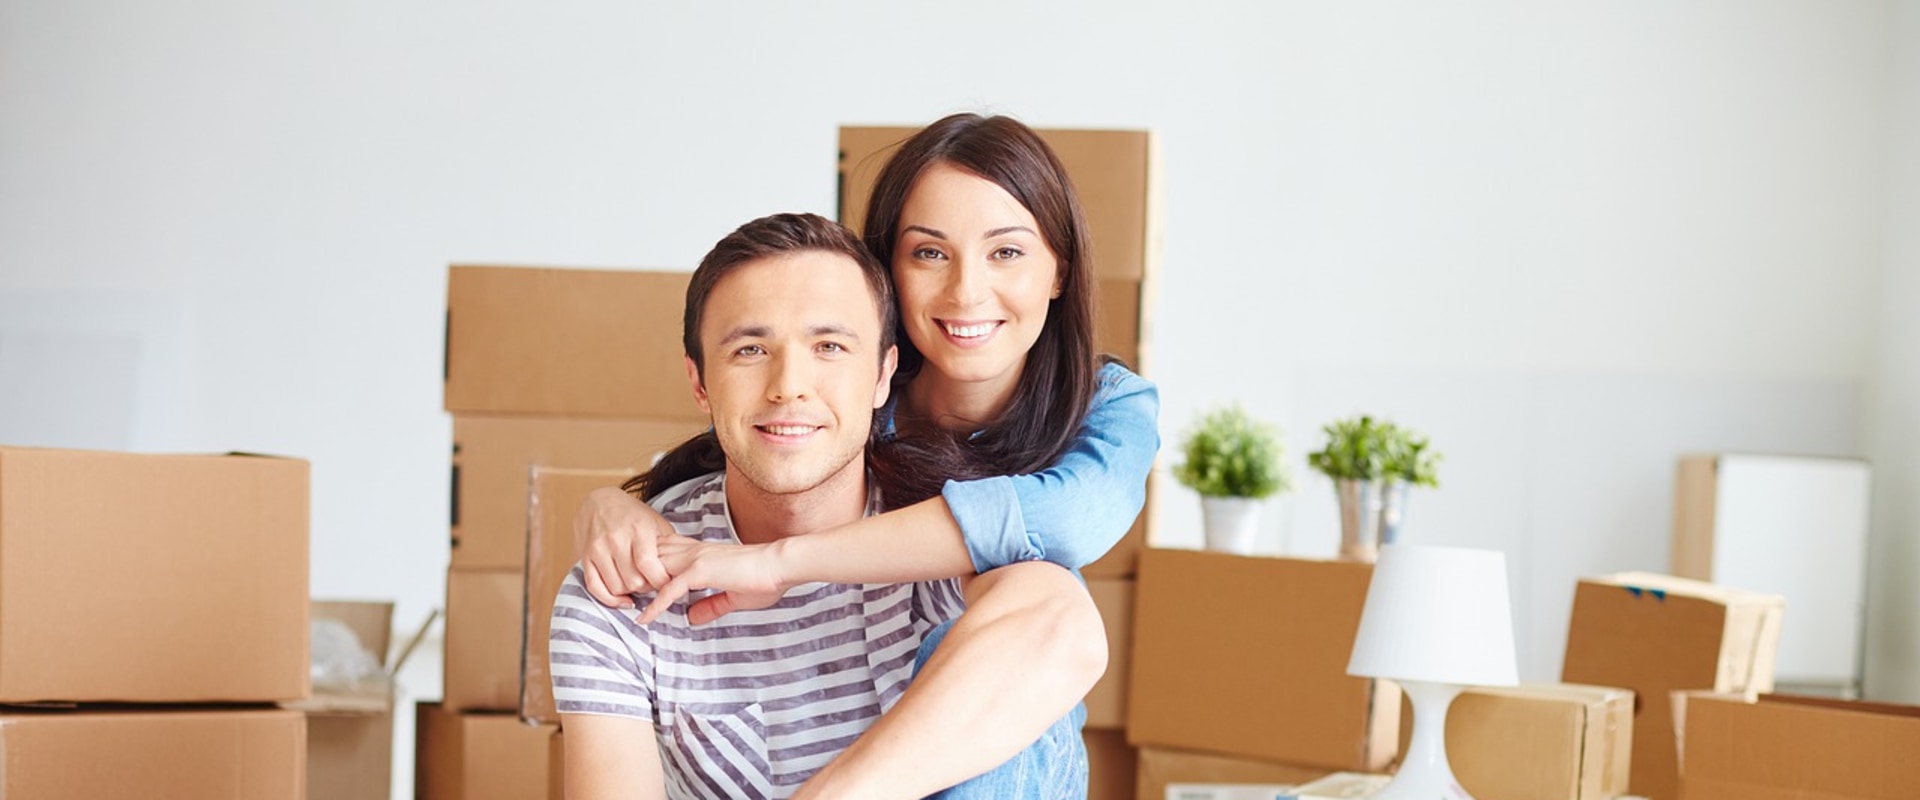 What Are the Hidden Costs of Moving?